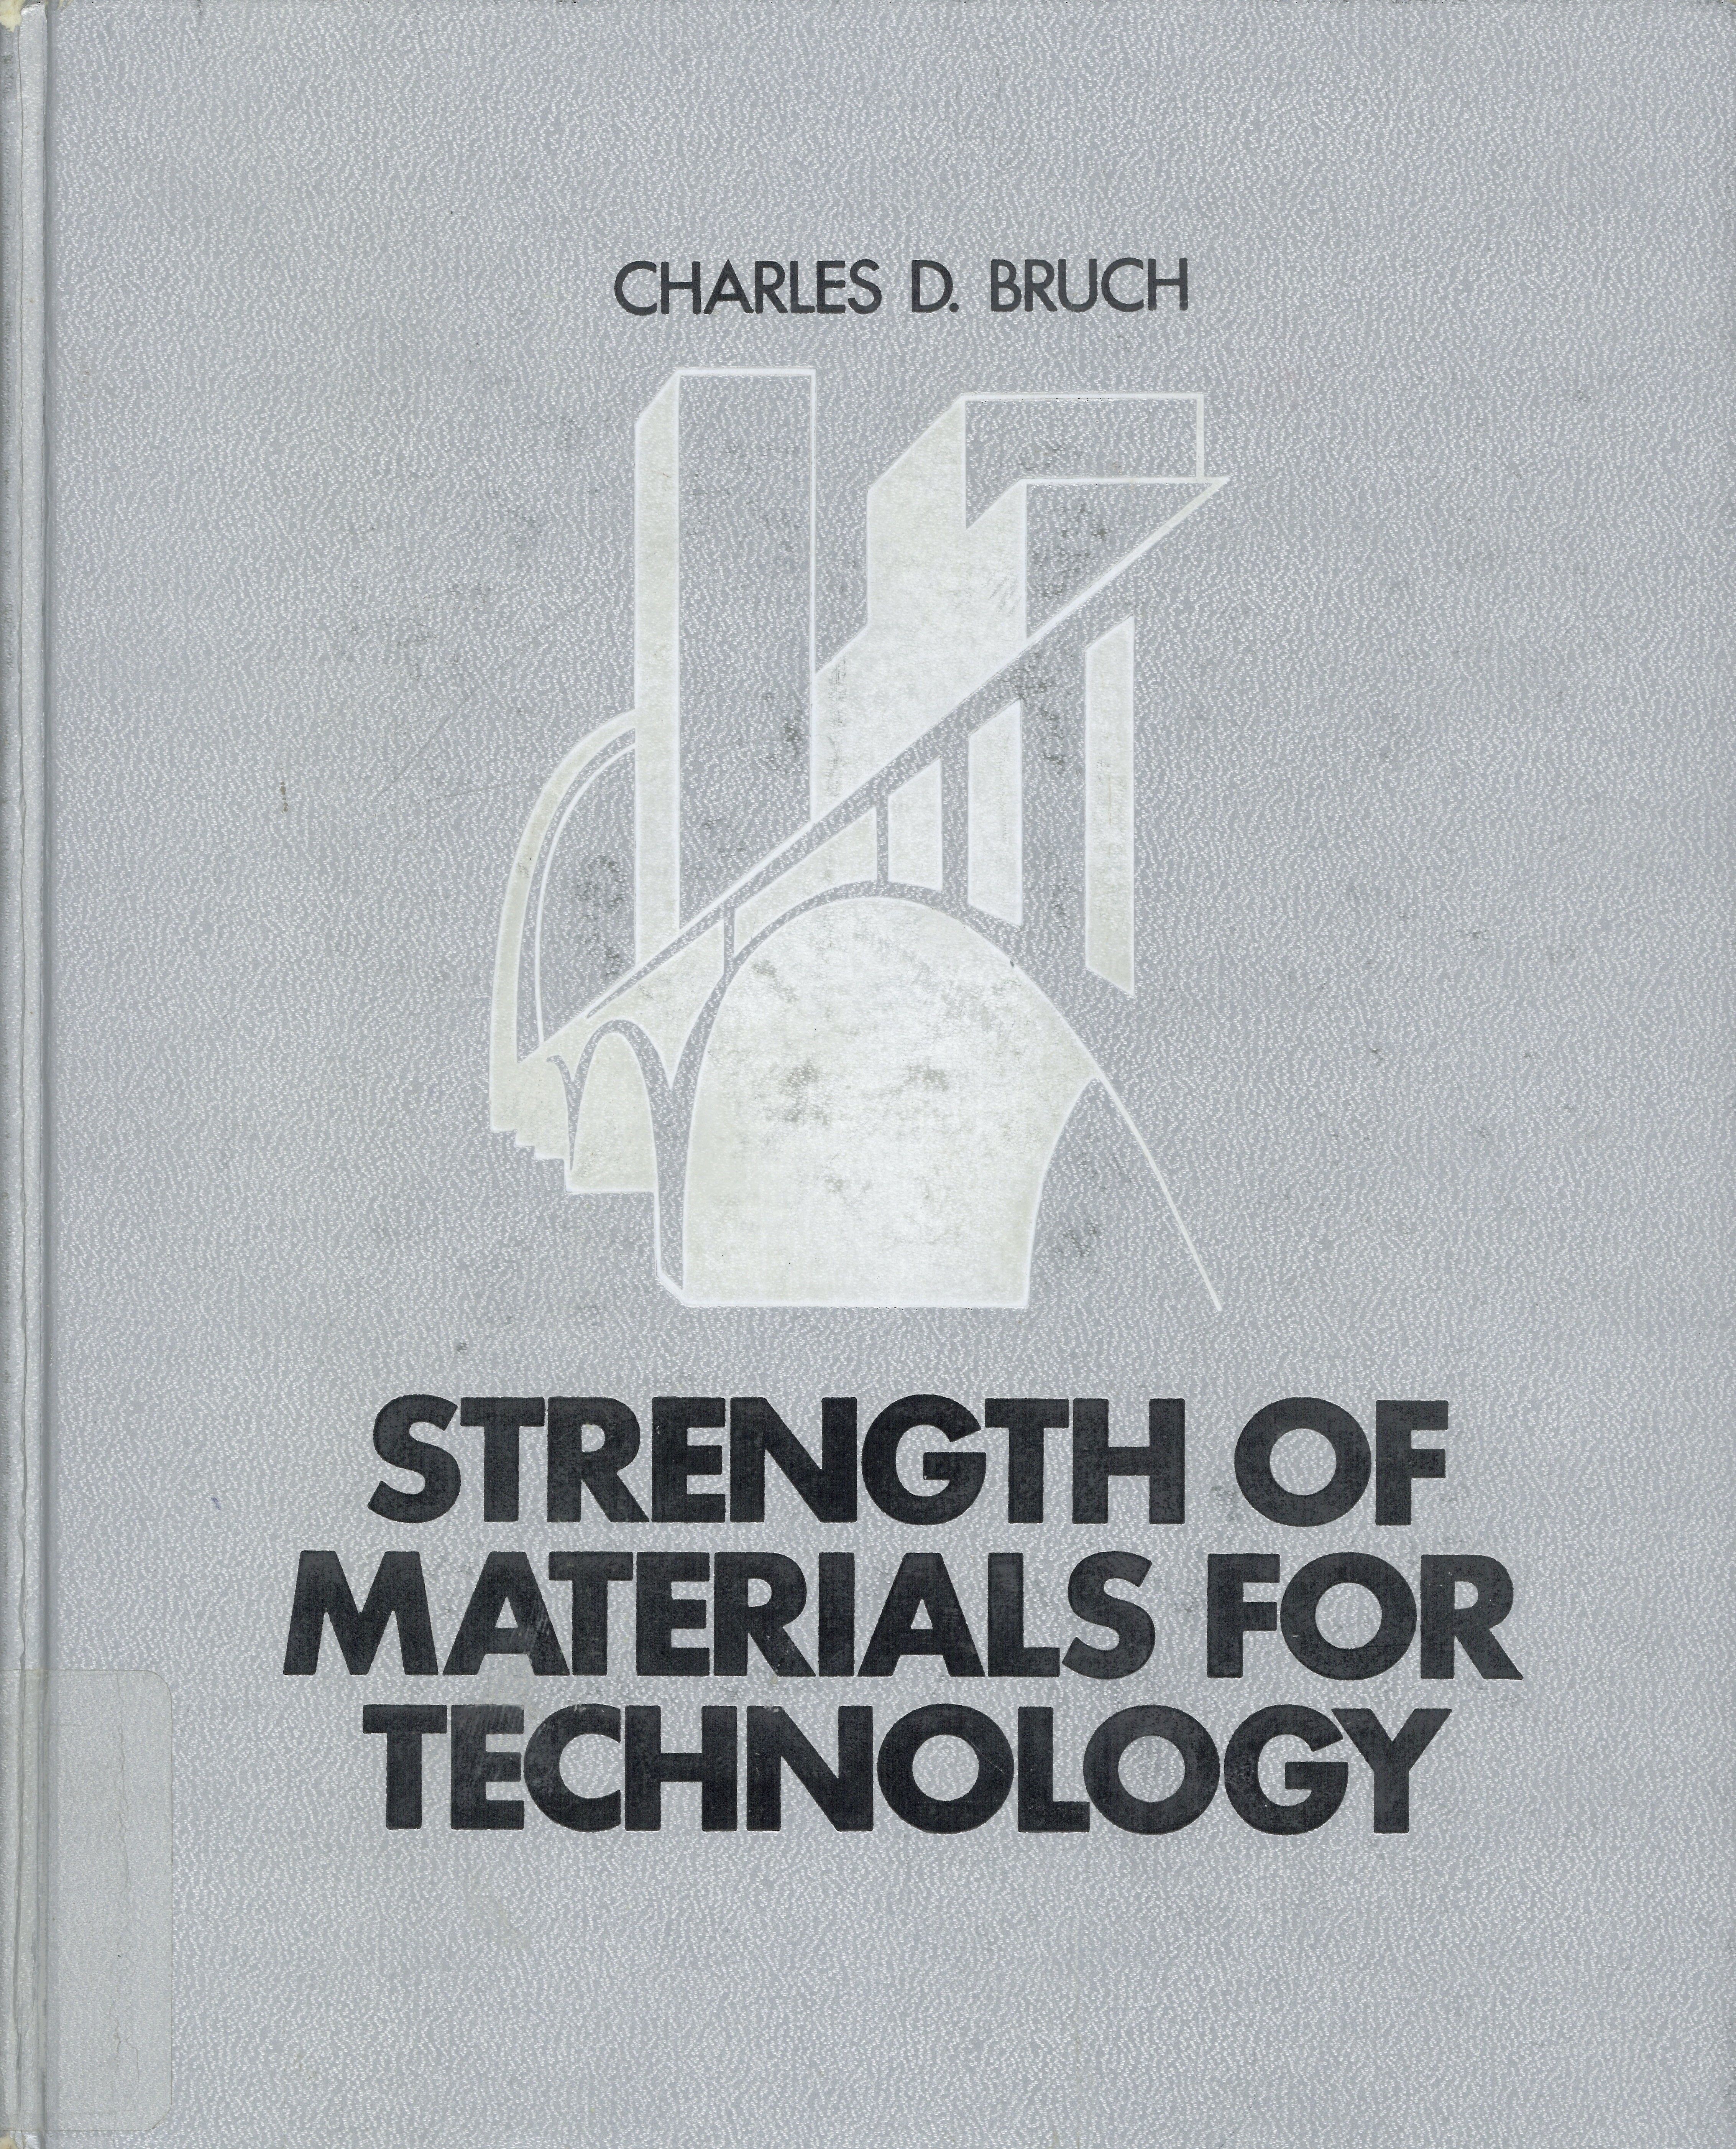 Strength of materials for technology